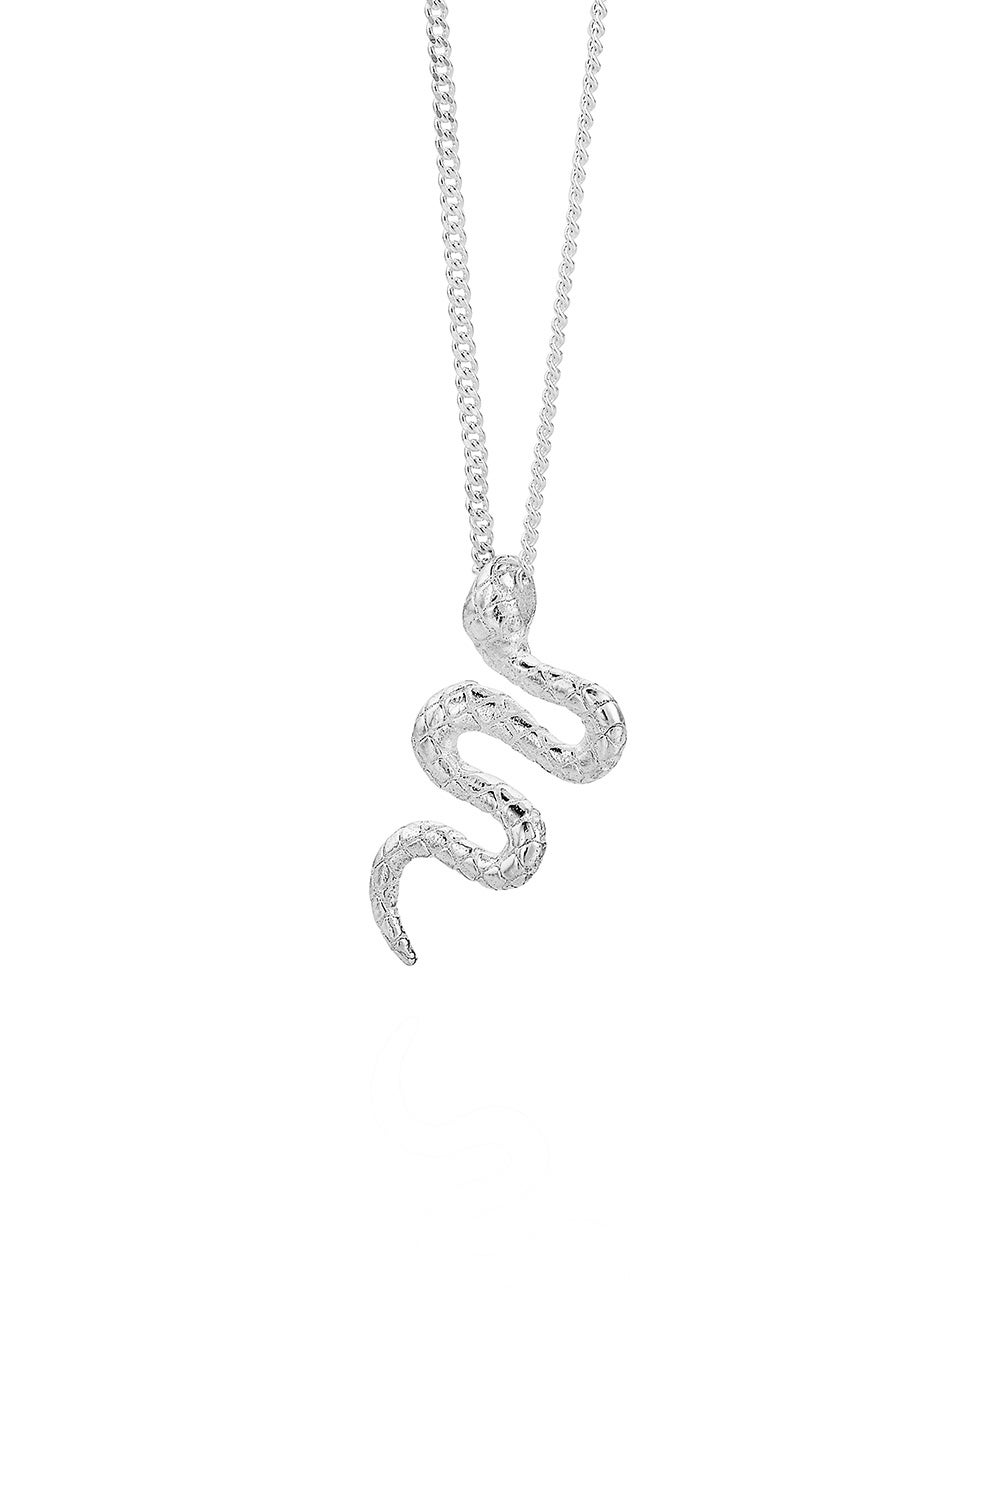 Snake necklace 3mm gold | Rosefield Official